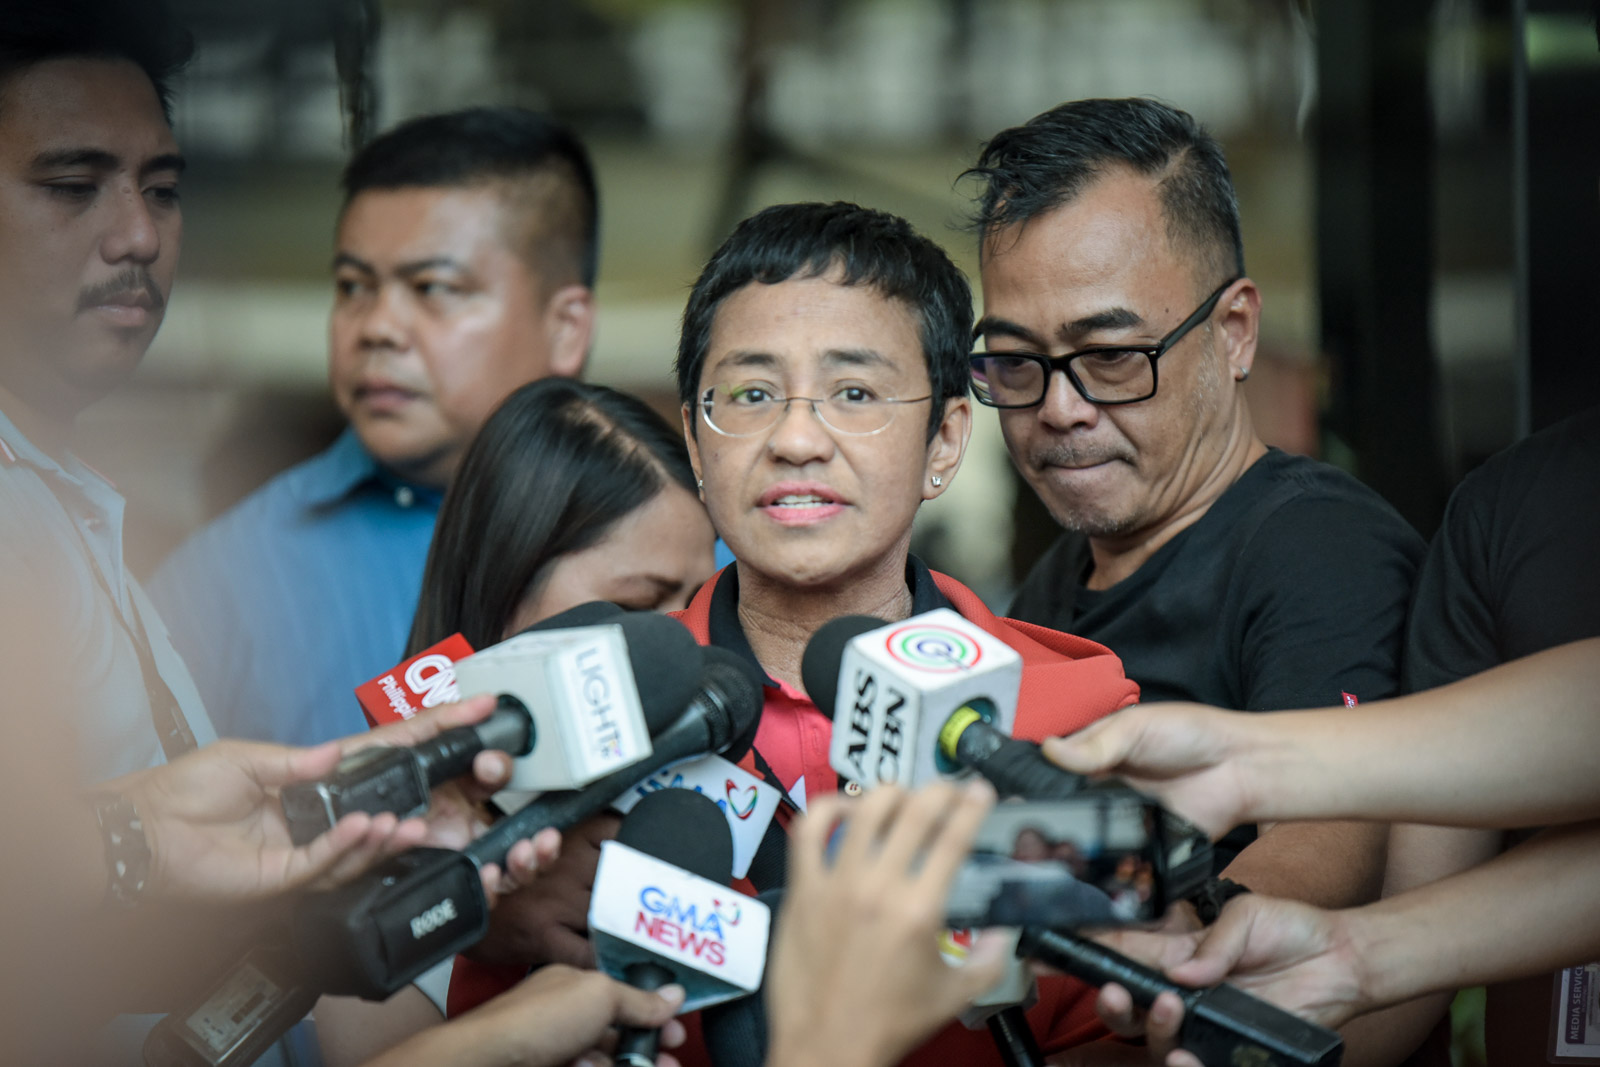 ANTI-TERROR BILL. Rappler CEO Maria Ressa says the anti-terrorism bill will endanger rights protected under the Constitution. File photo by LeAnne Jazul/Rappler  